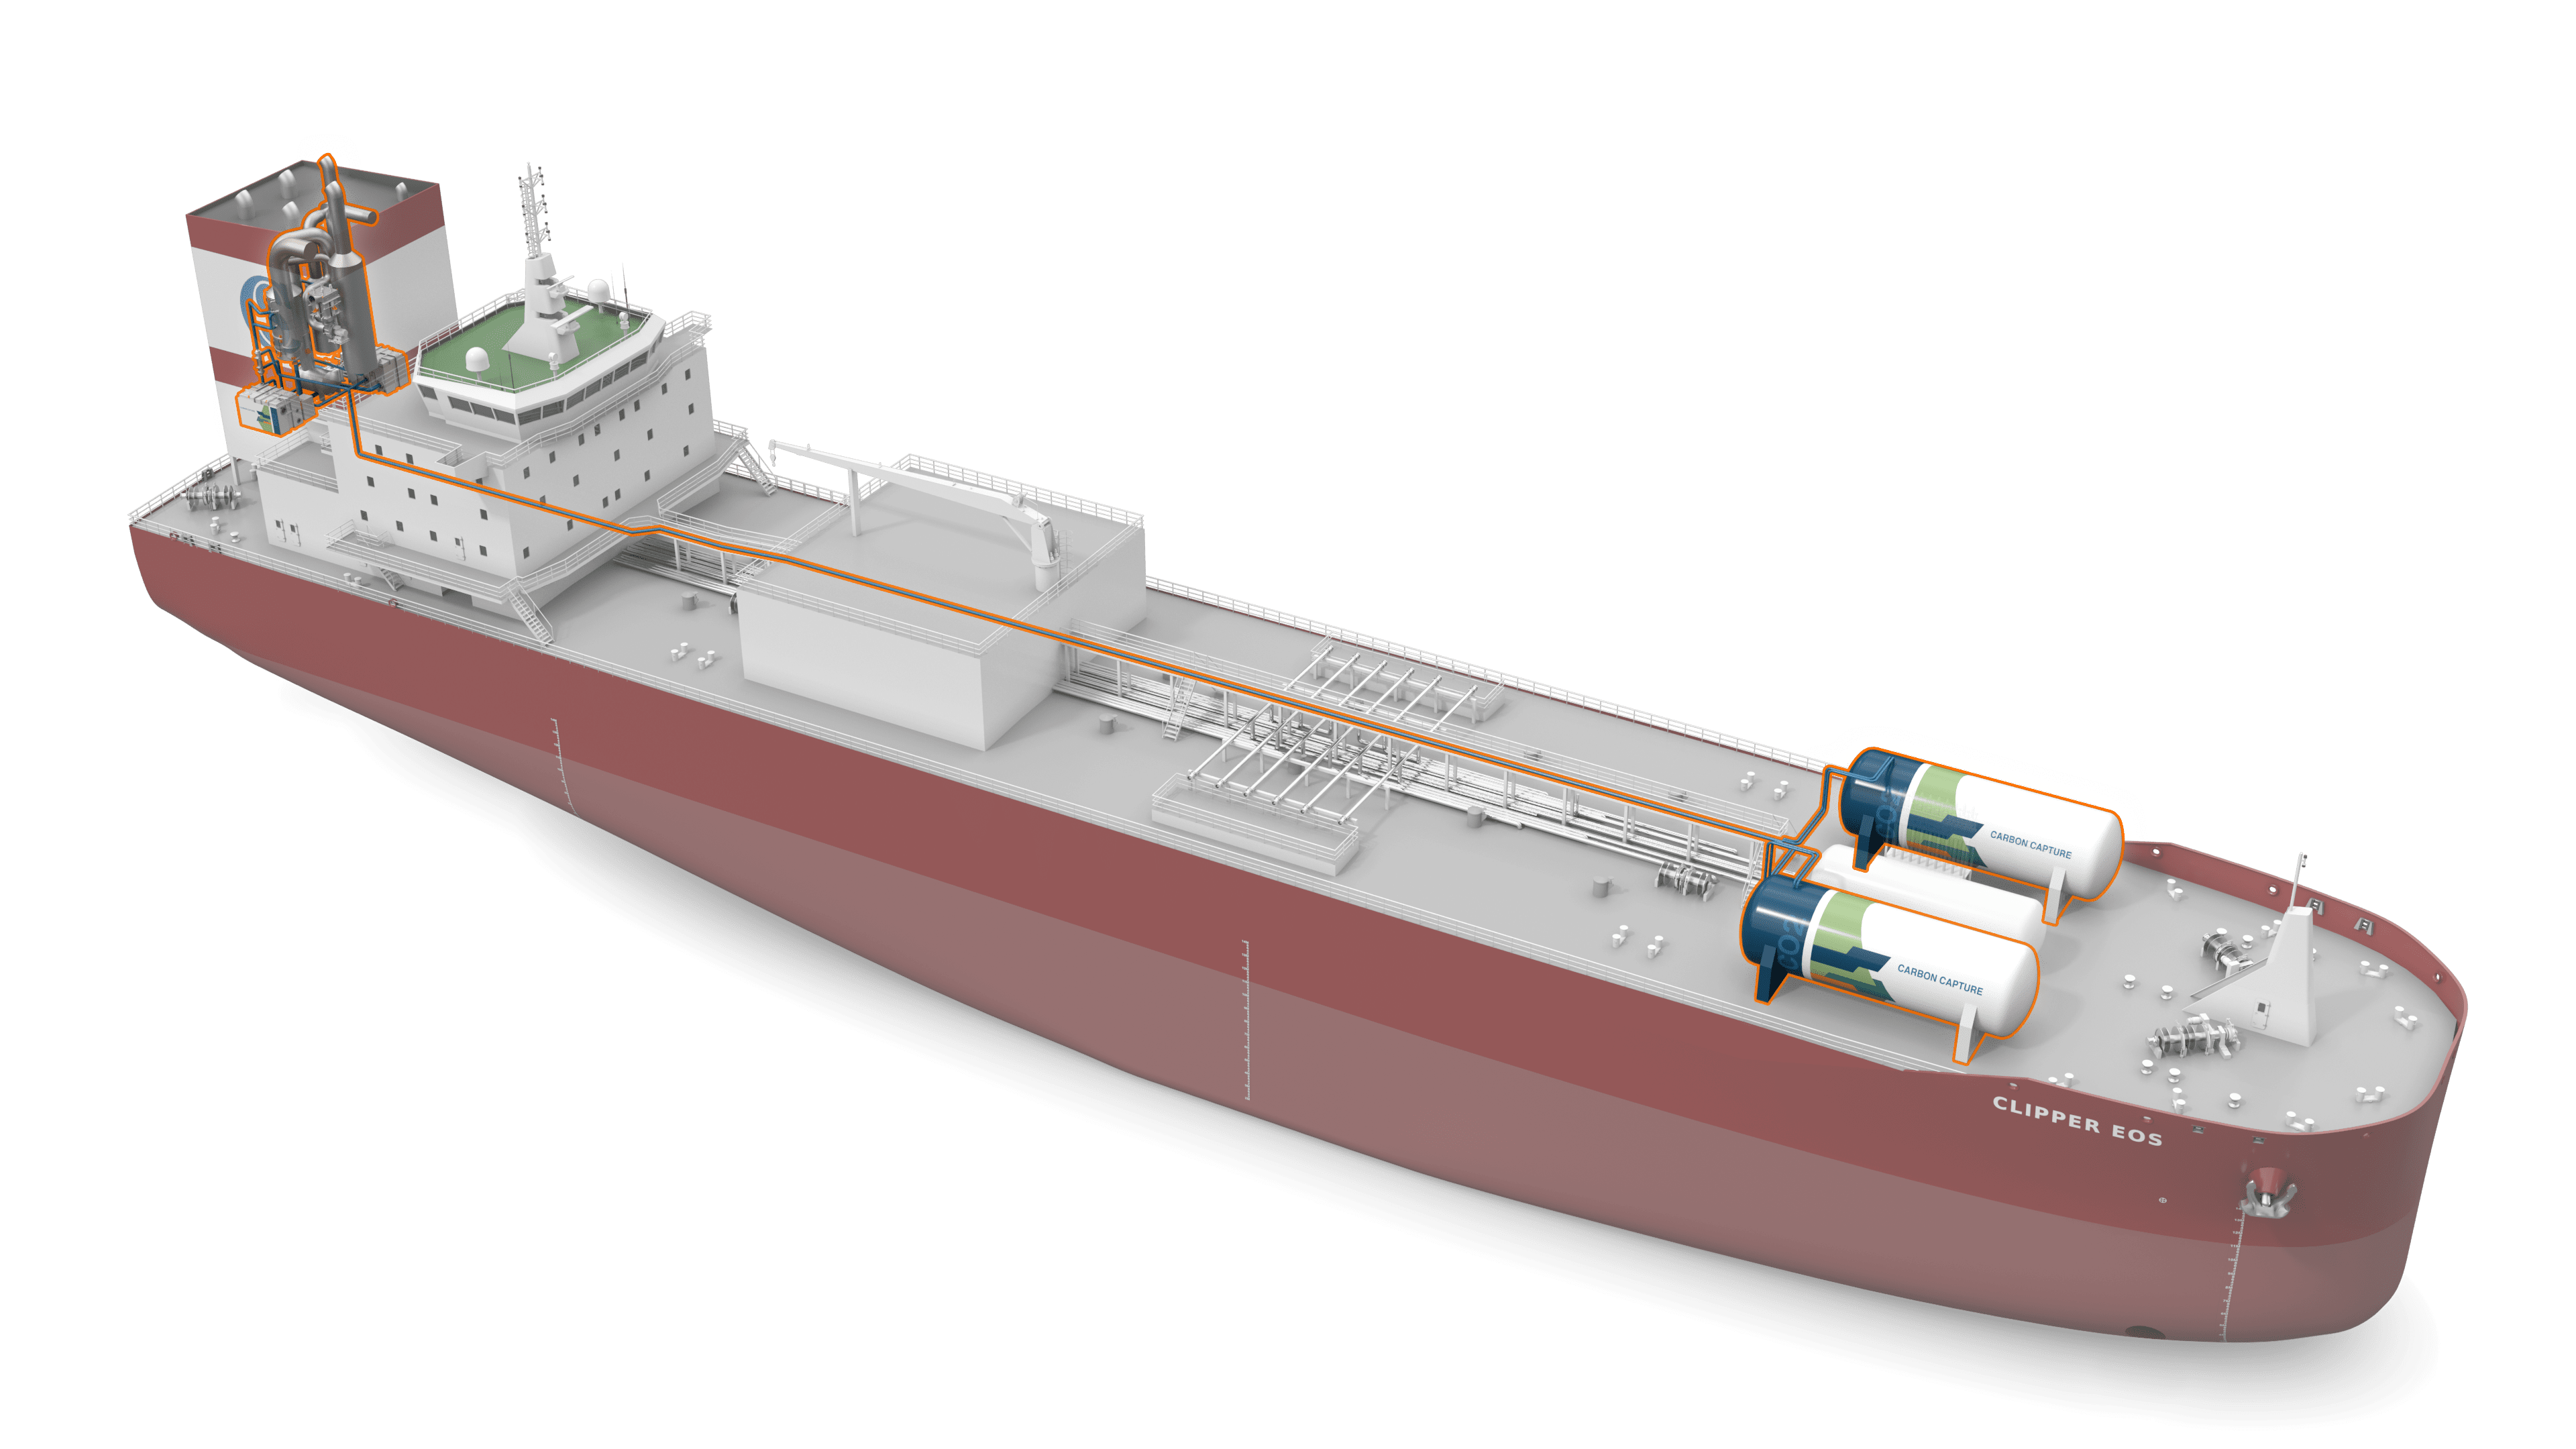 Wärtsilä and Solvang to collaborate on retrofitting carbon capture and storage system on Clipper Eos